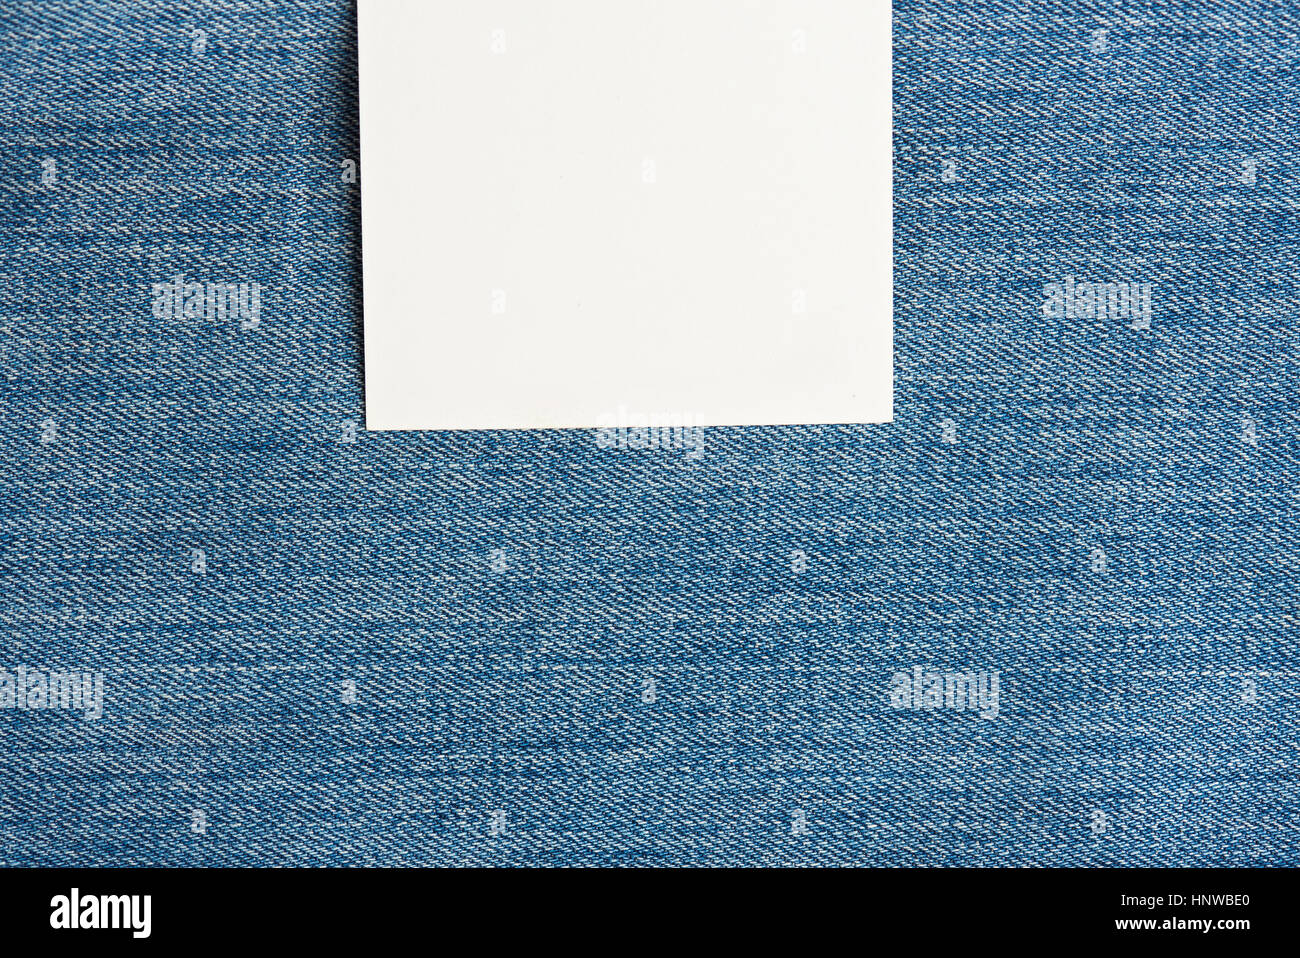 White square label on top of light blue jeans texture Stock Photo